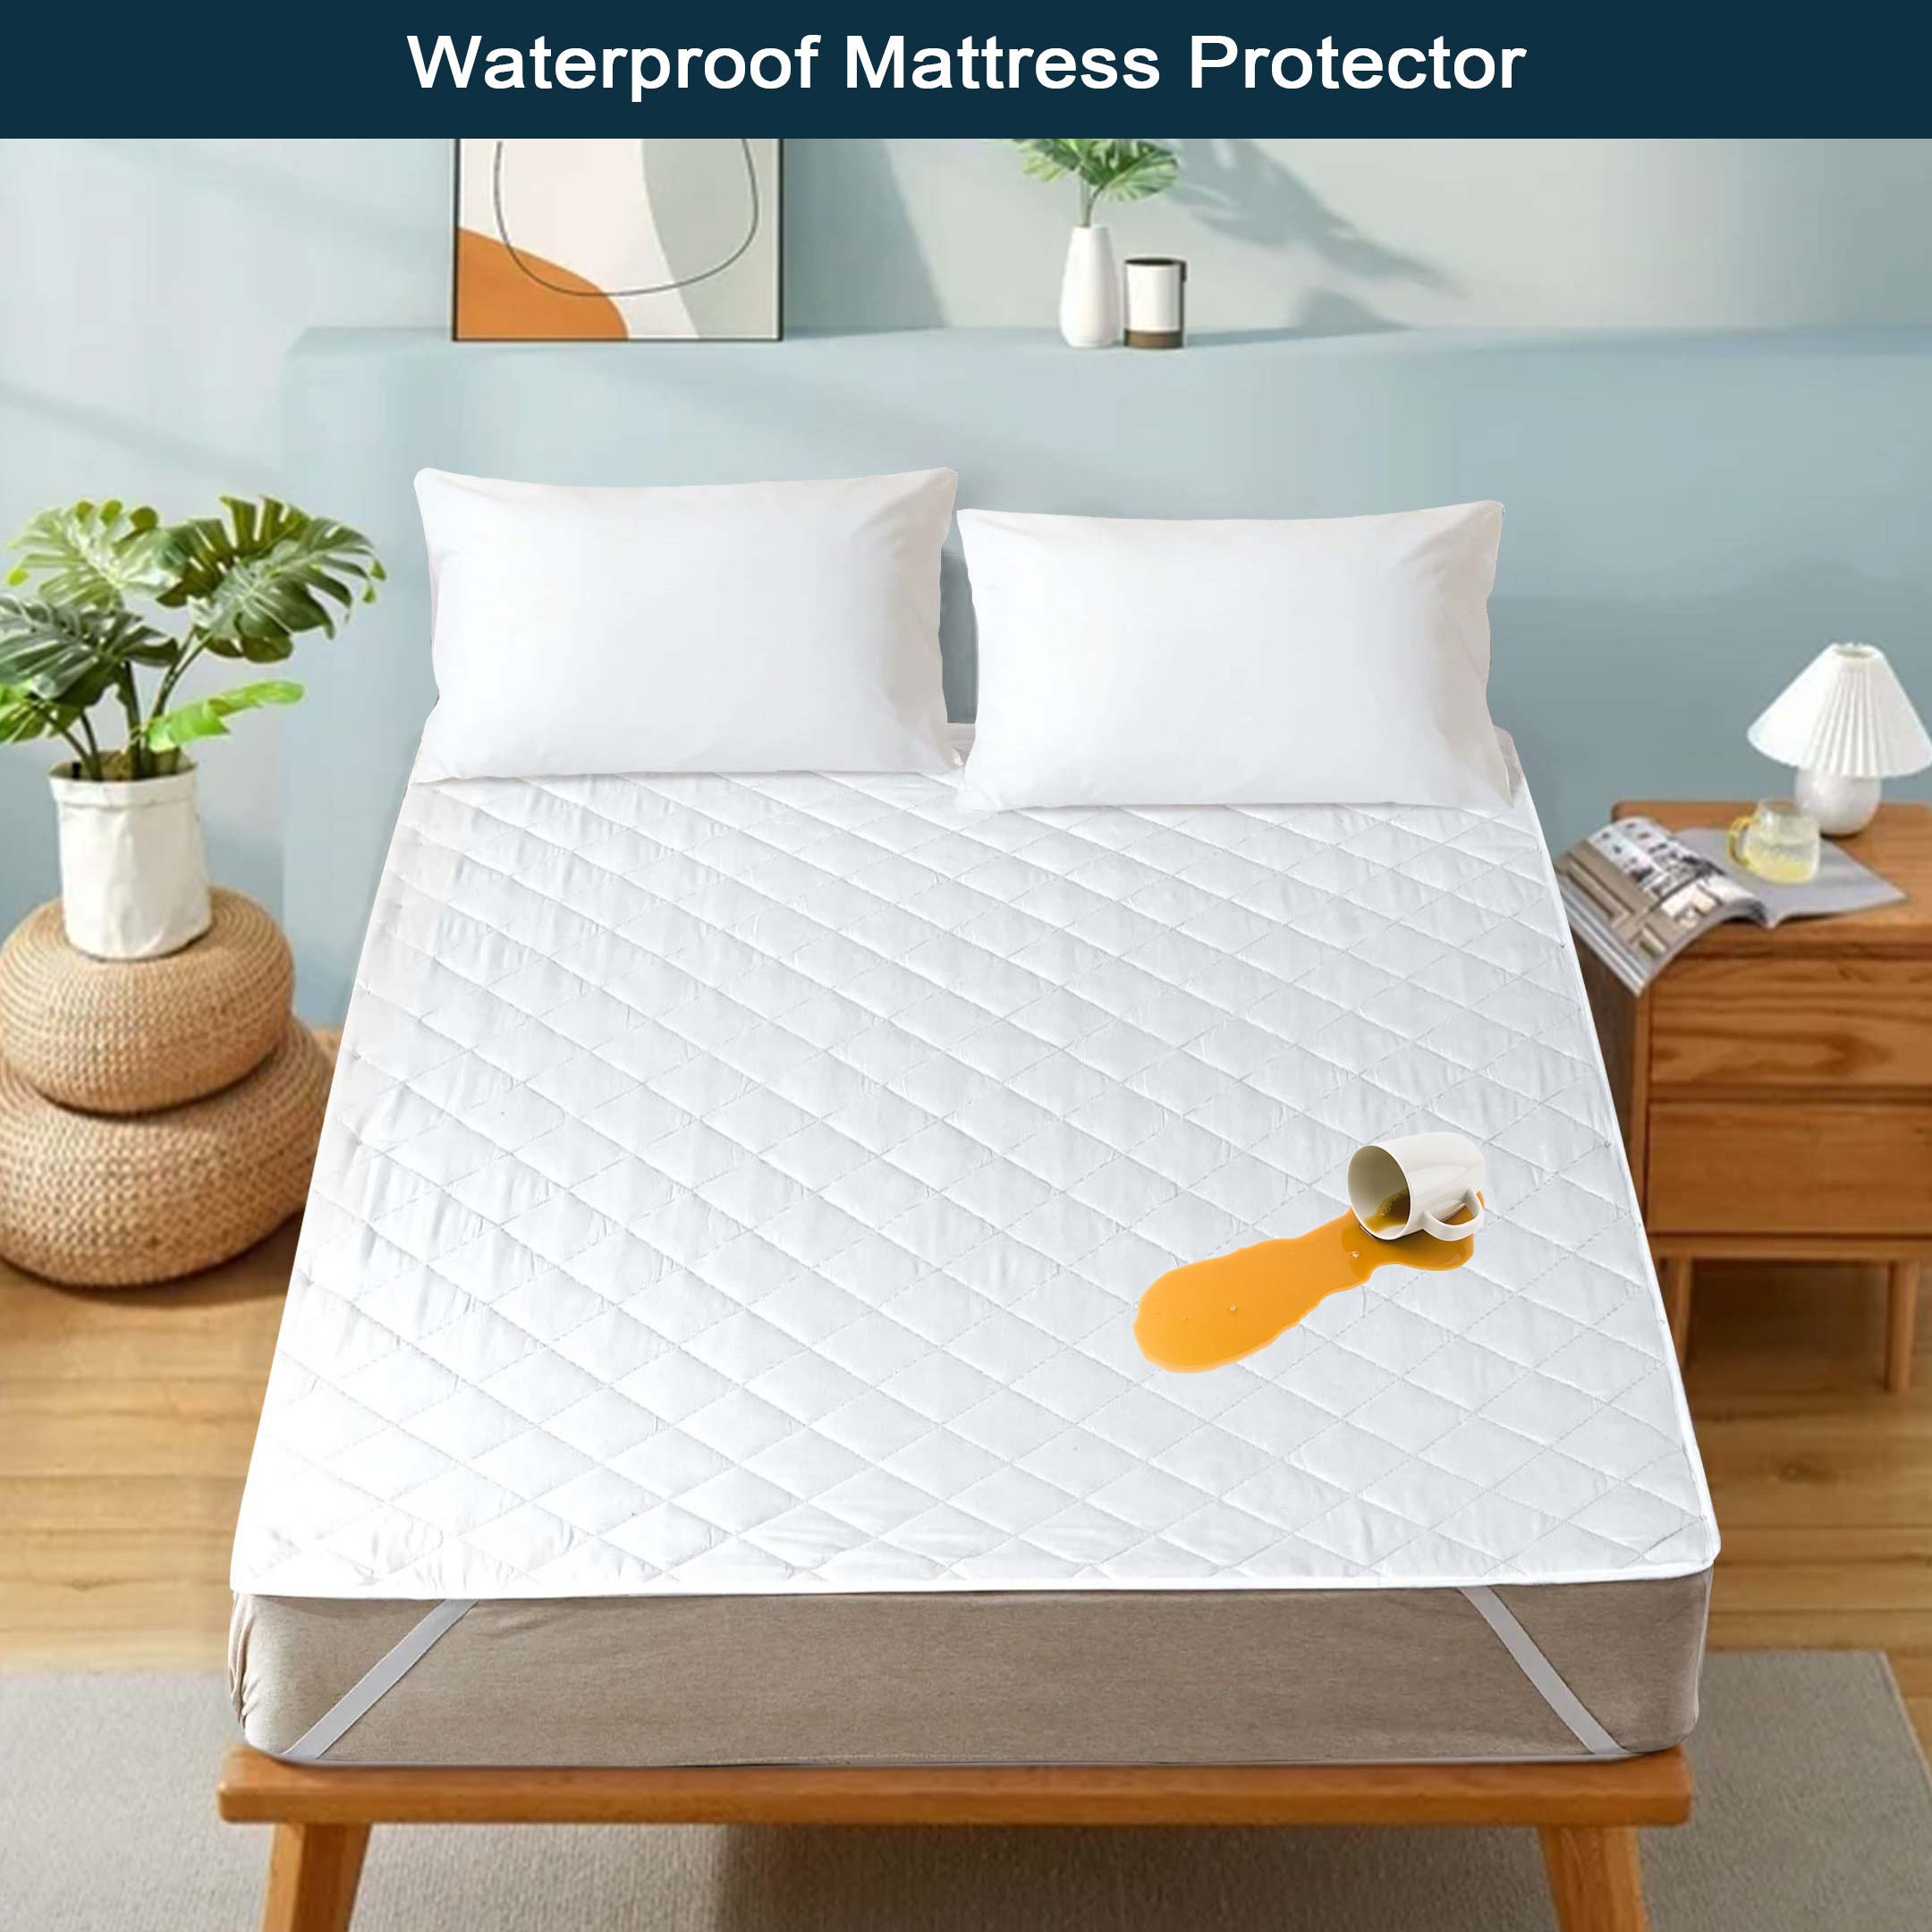 Bed Pads for Incontinence Washable with 4 Layers of Protection, Waterproof Bed Pads Large 2 Pack 34 x 52 Great for Adult, Children and Pets